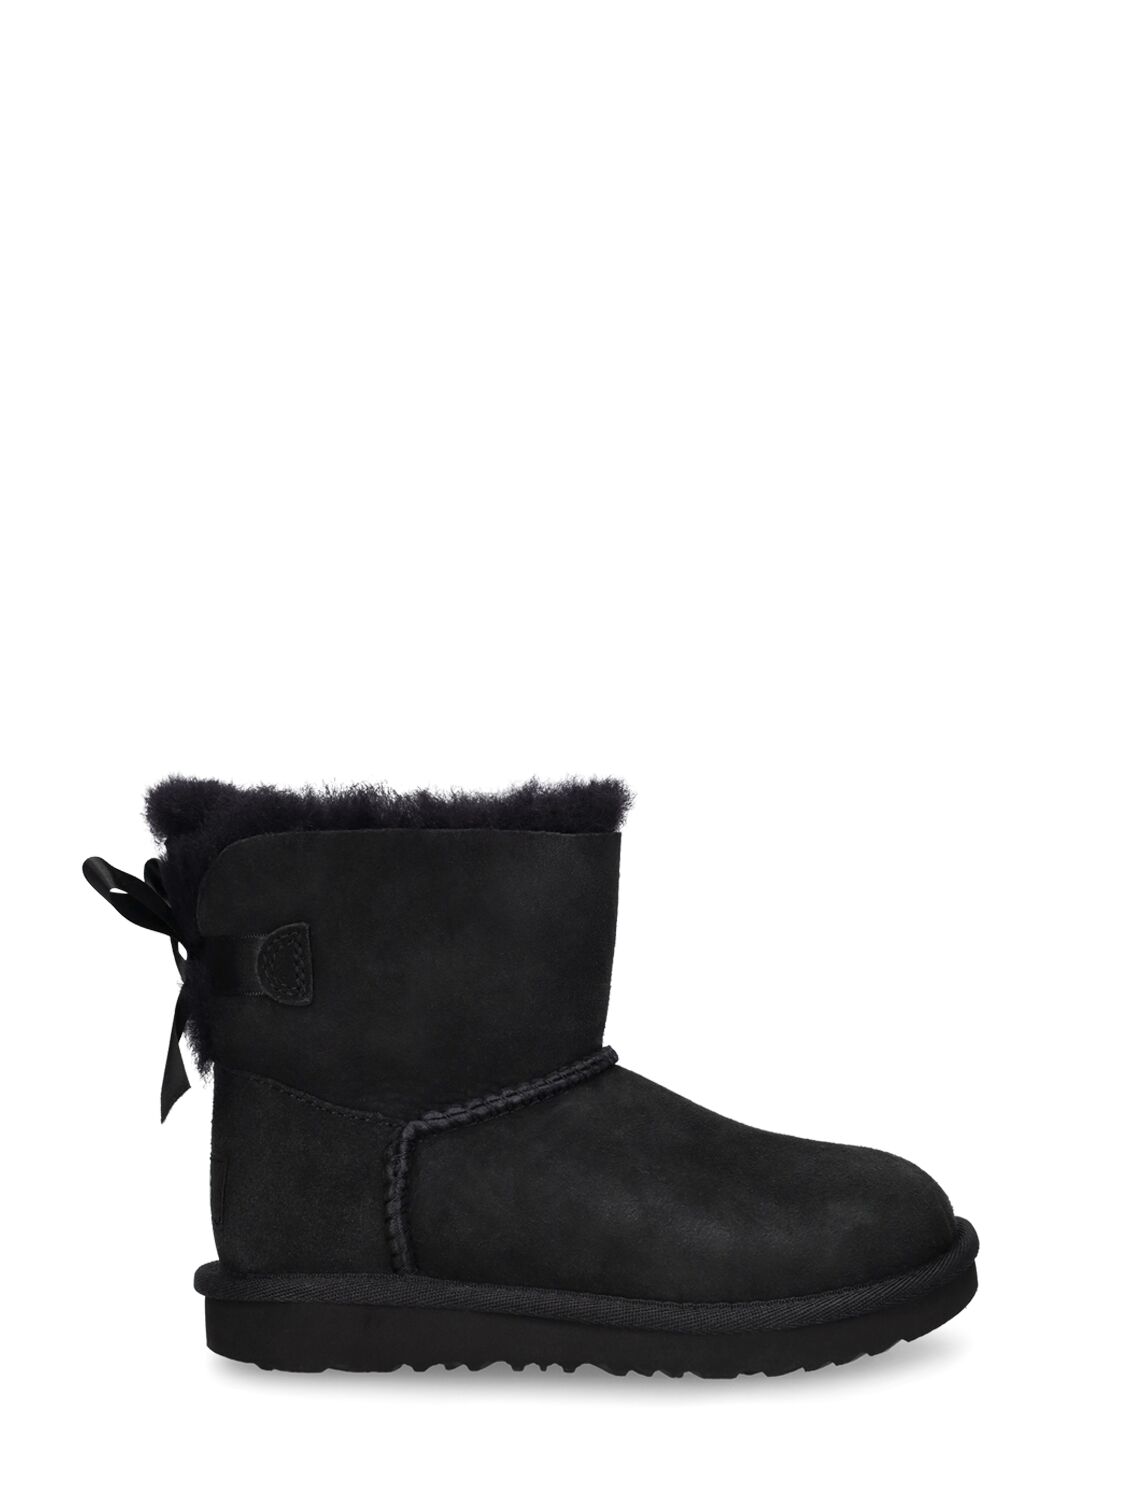 Image of Mini Bailey Bow Ii Shearling Boots